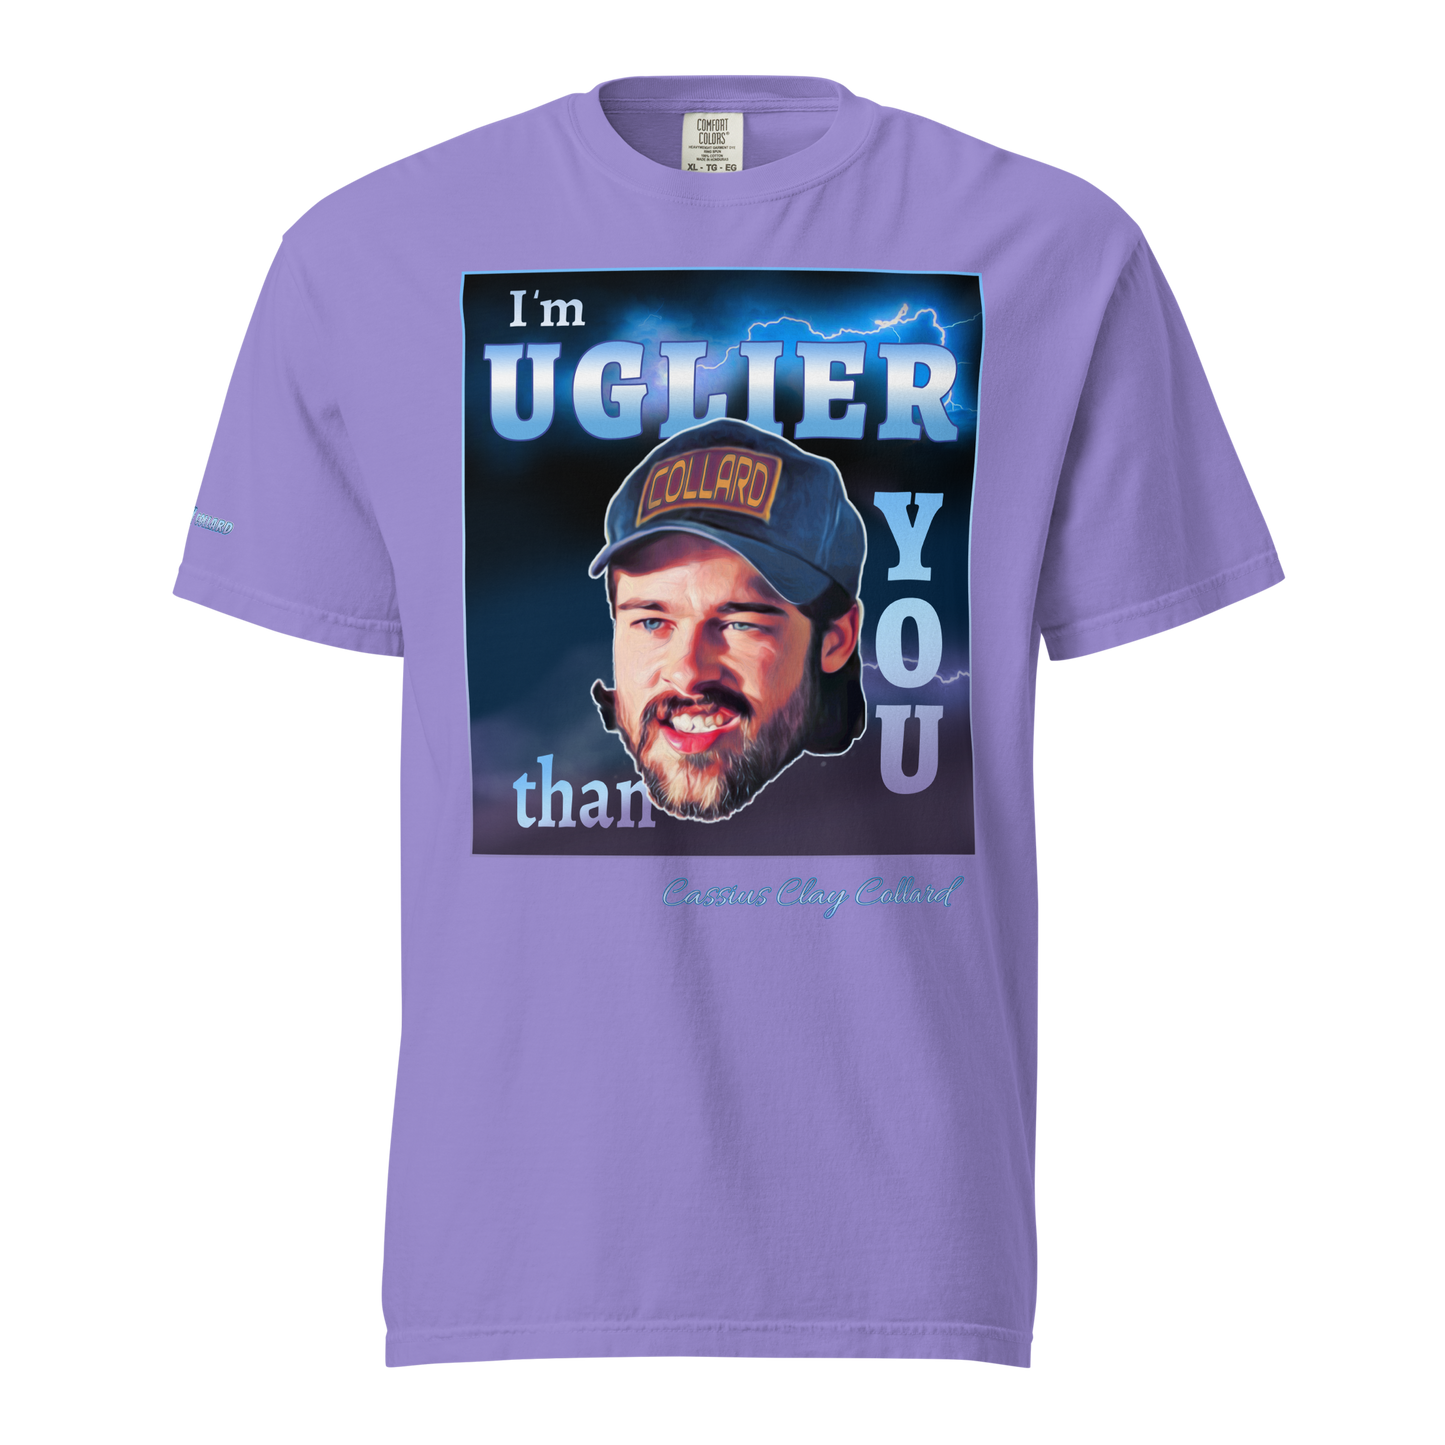 Cassius Clay Collard "I'm Uglier than You" T-Shirt STYLE 1 - southspace